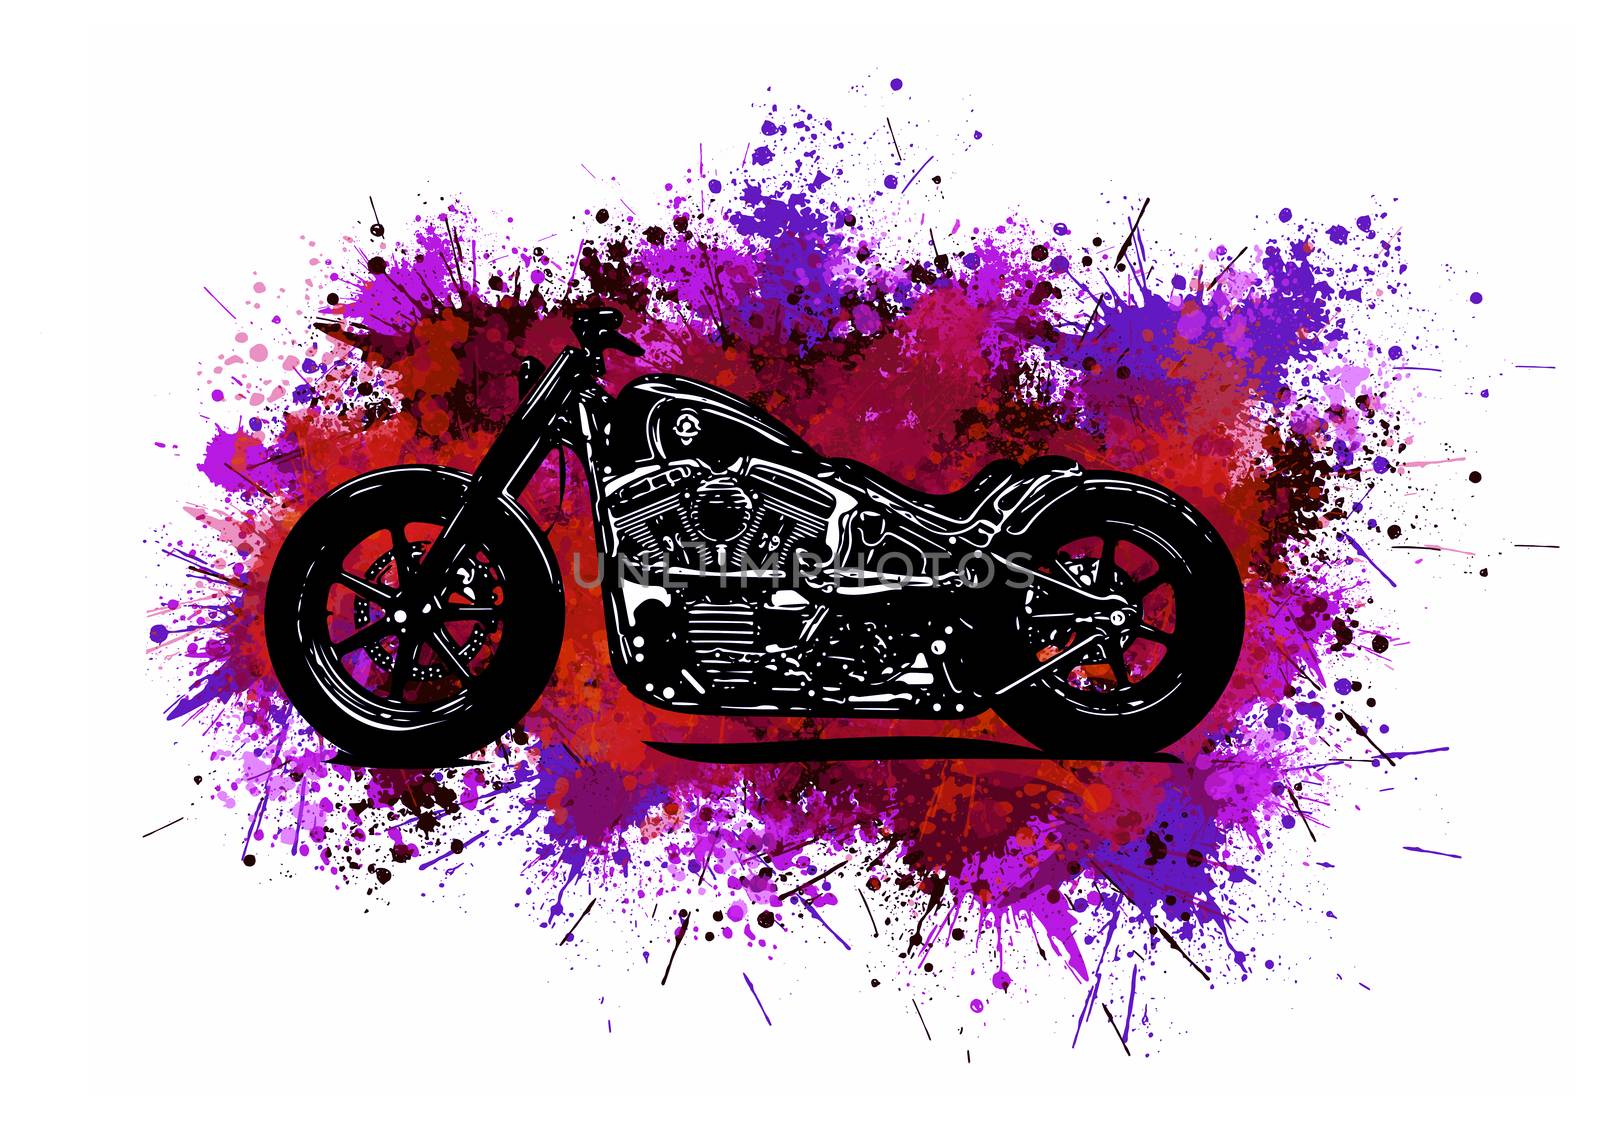 illustration watercolor colorful motorcycle chopper with stain by dean